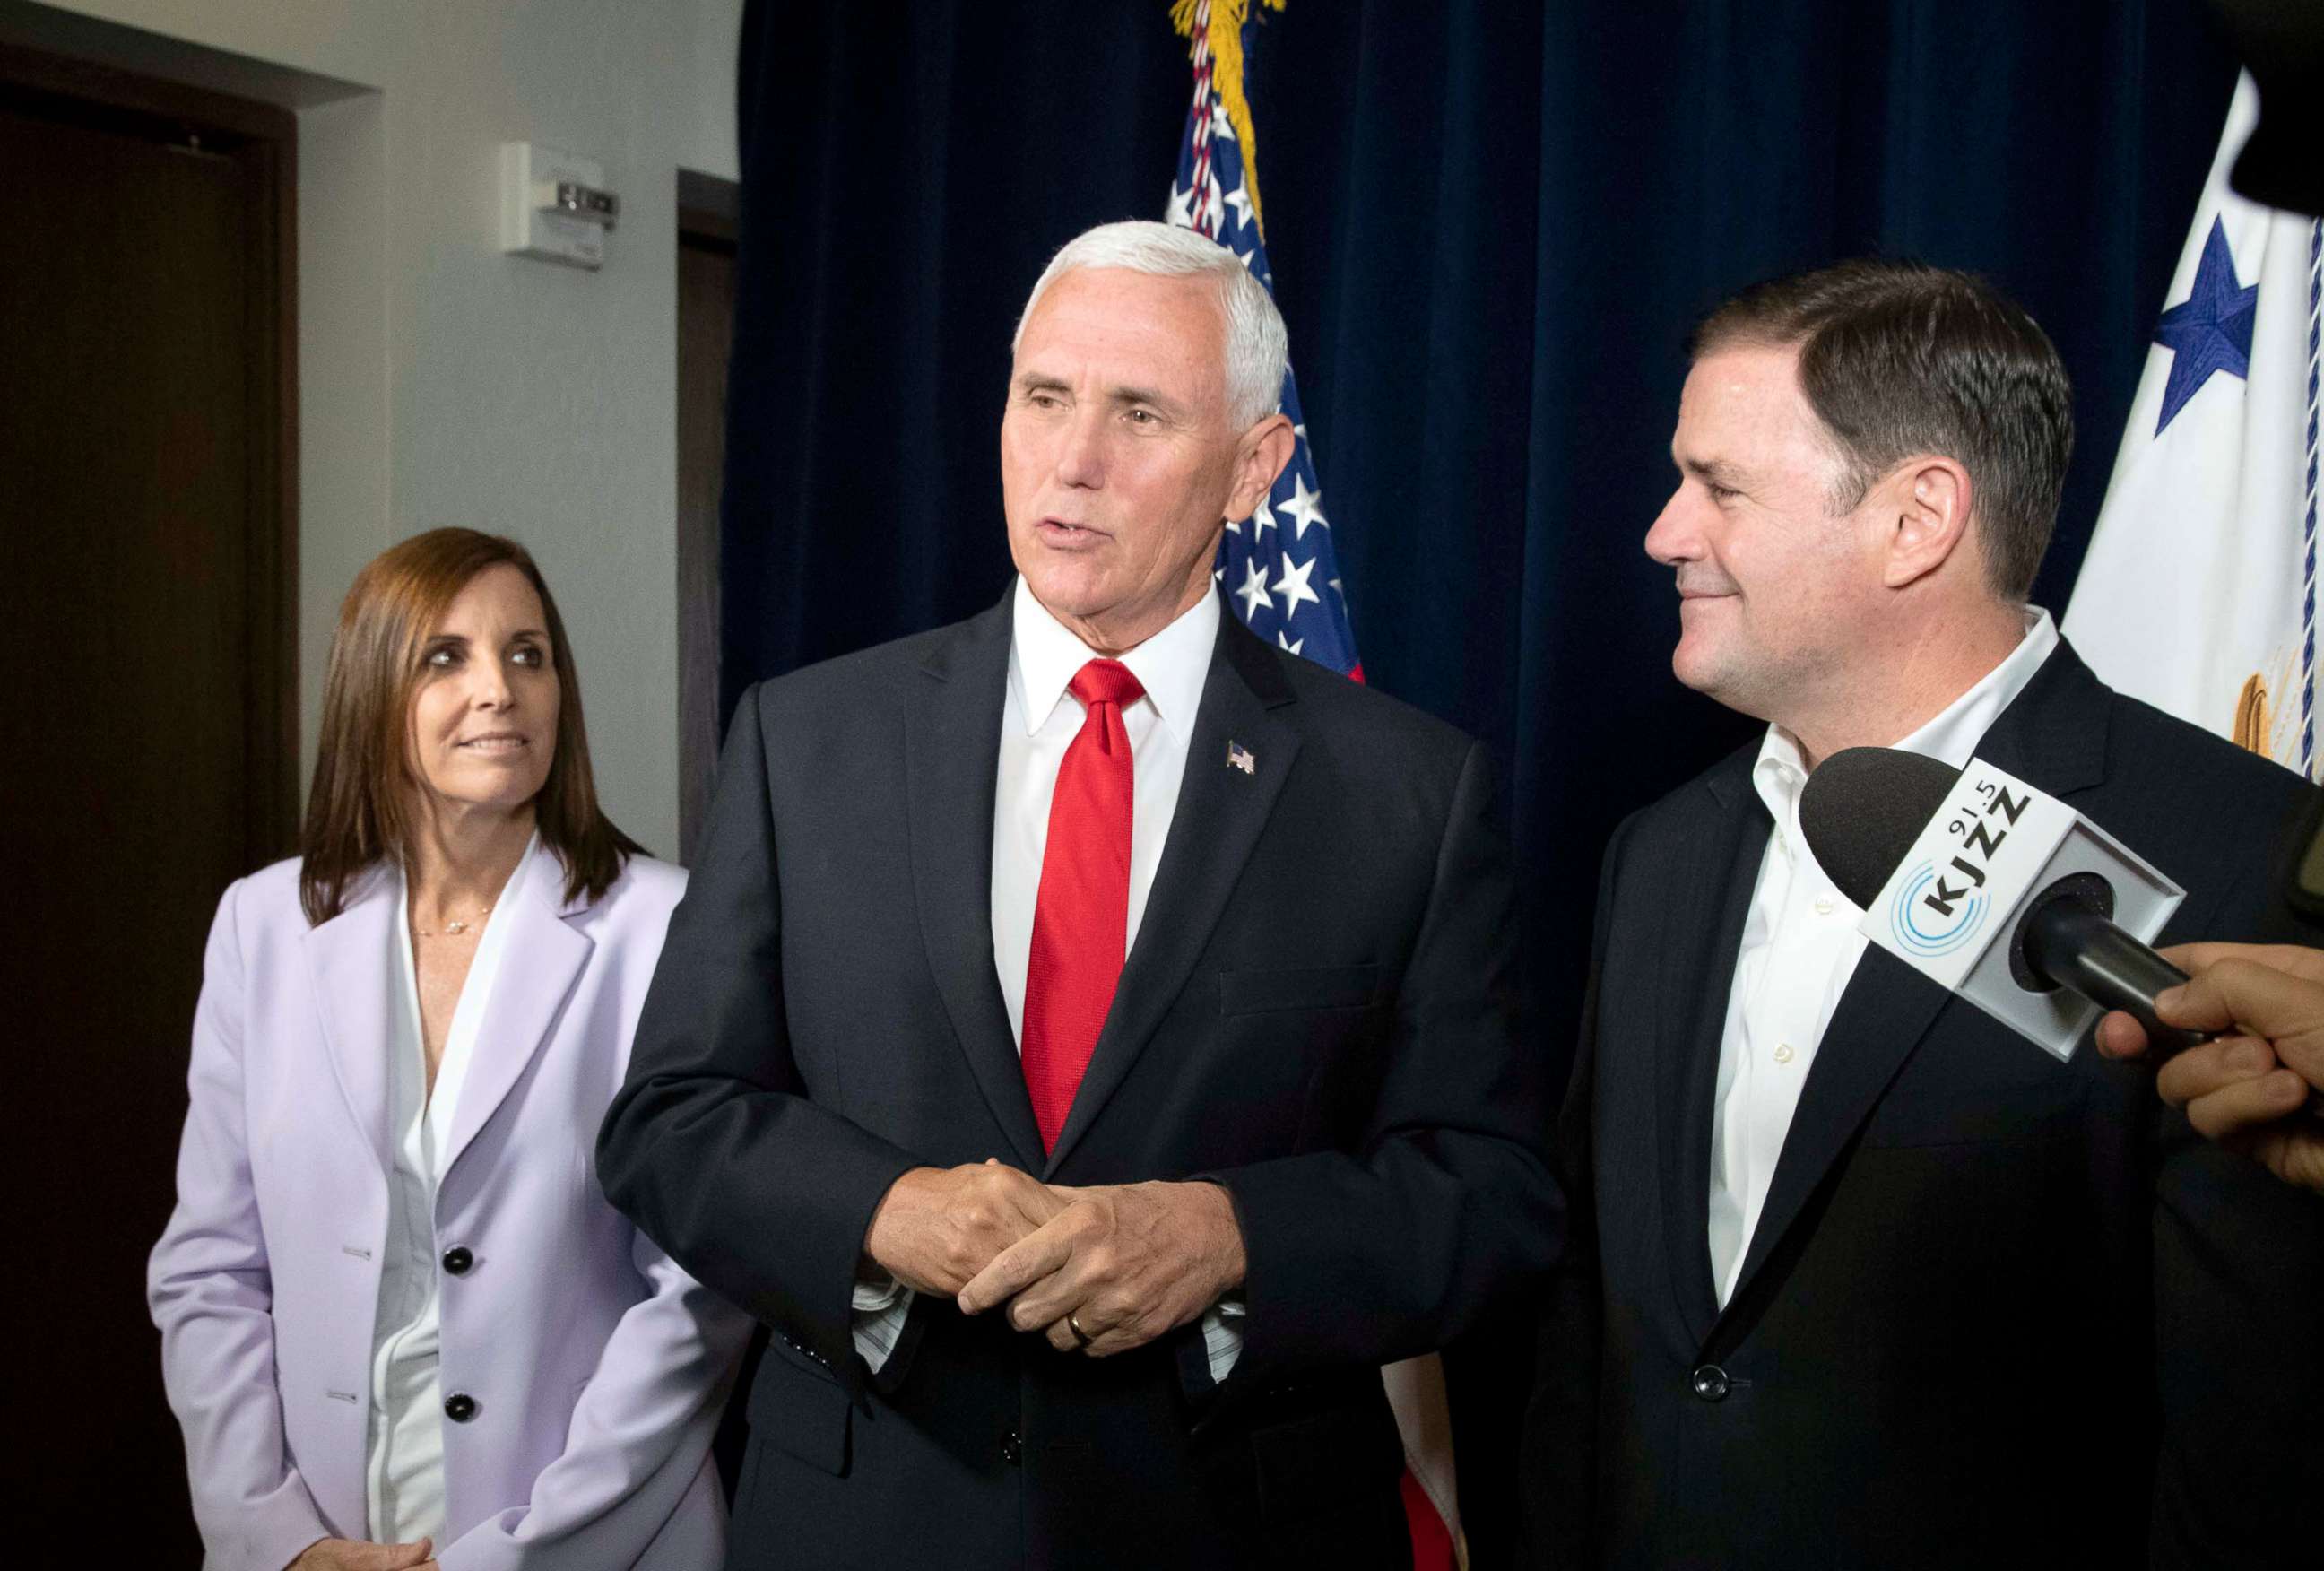 PHOTO: Vice President Mike Pence answers questions from members of the press after a discussion with Latino leaders in Phoenix, Ariz., Oct. 3, 2019.